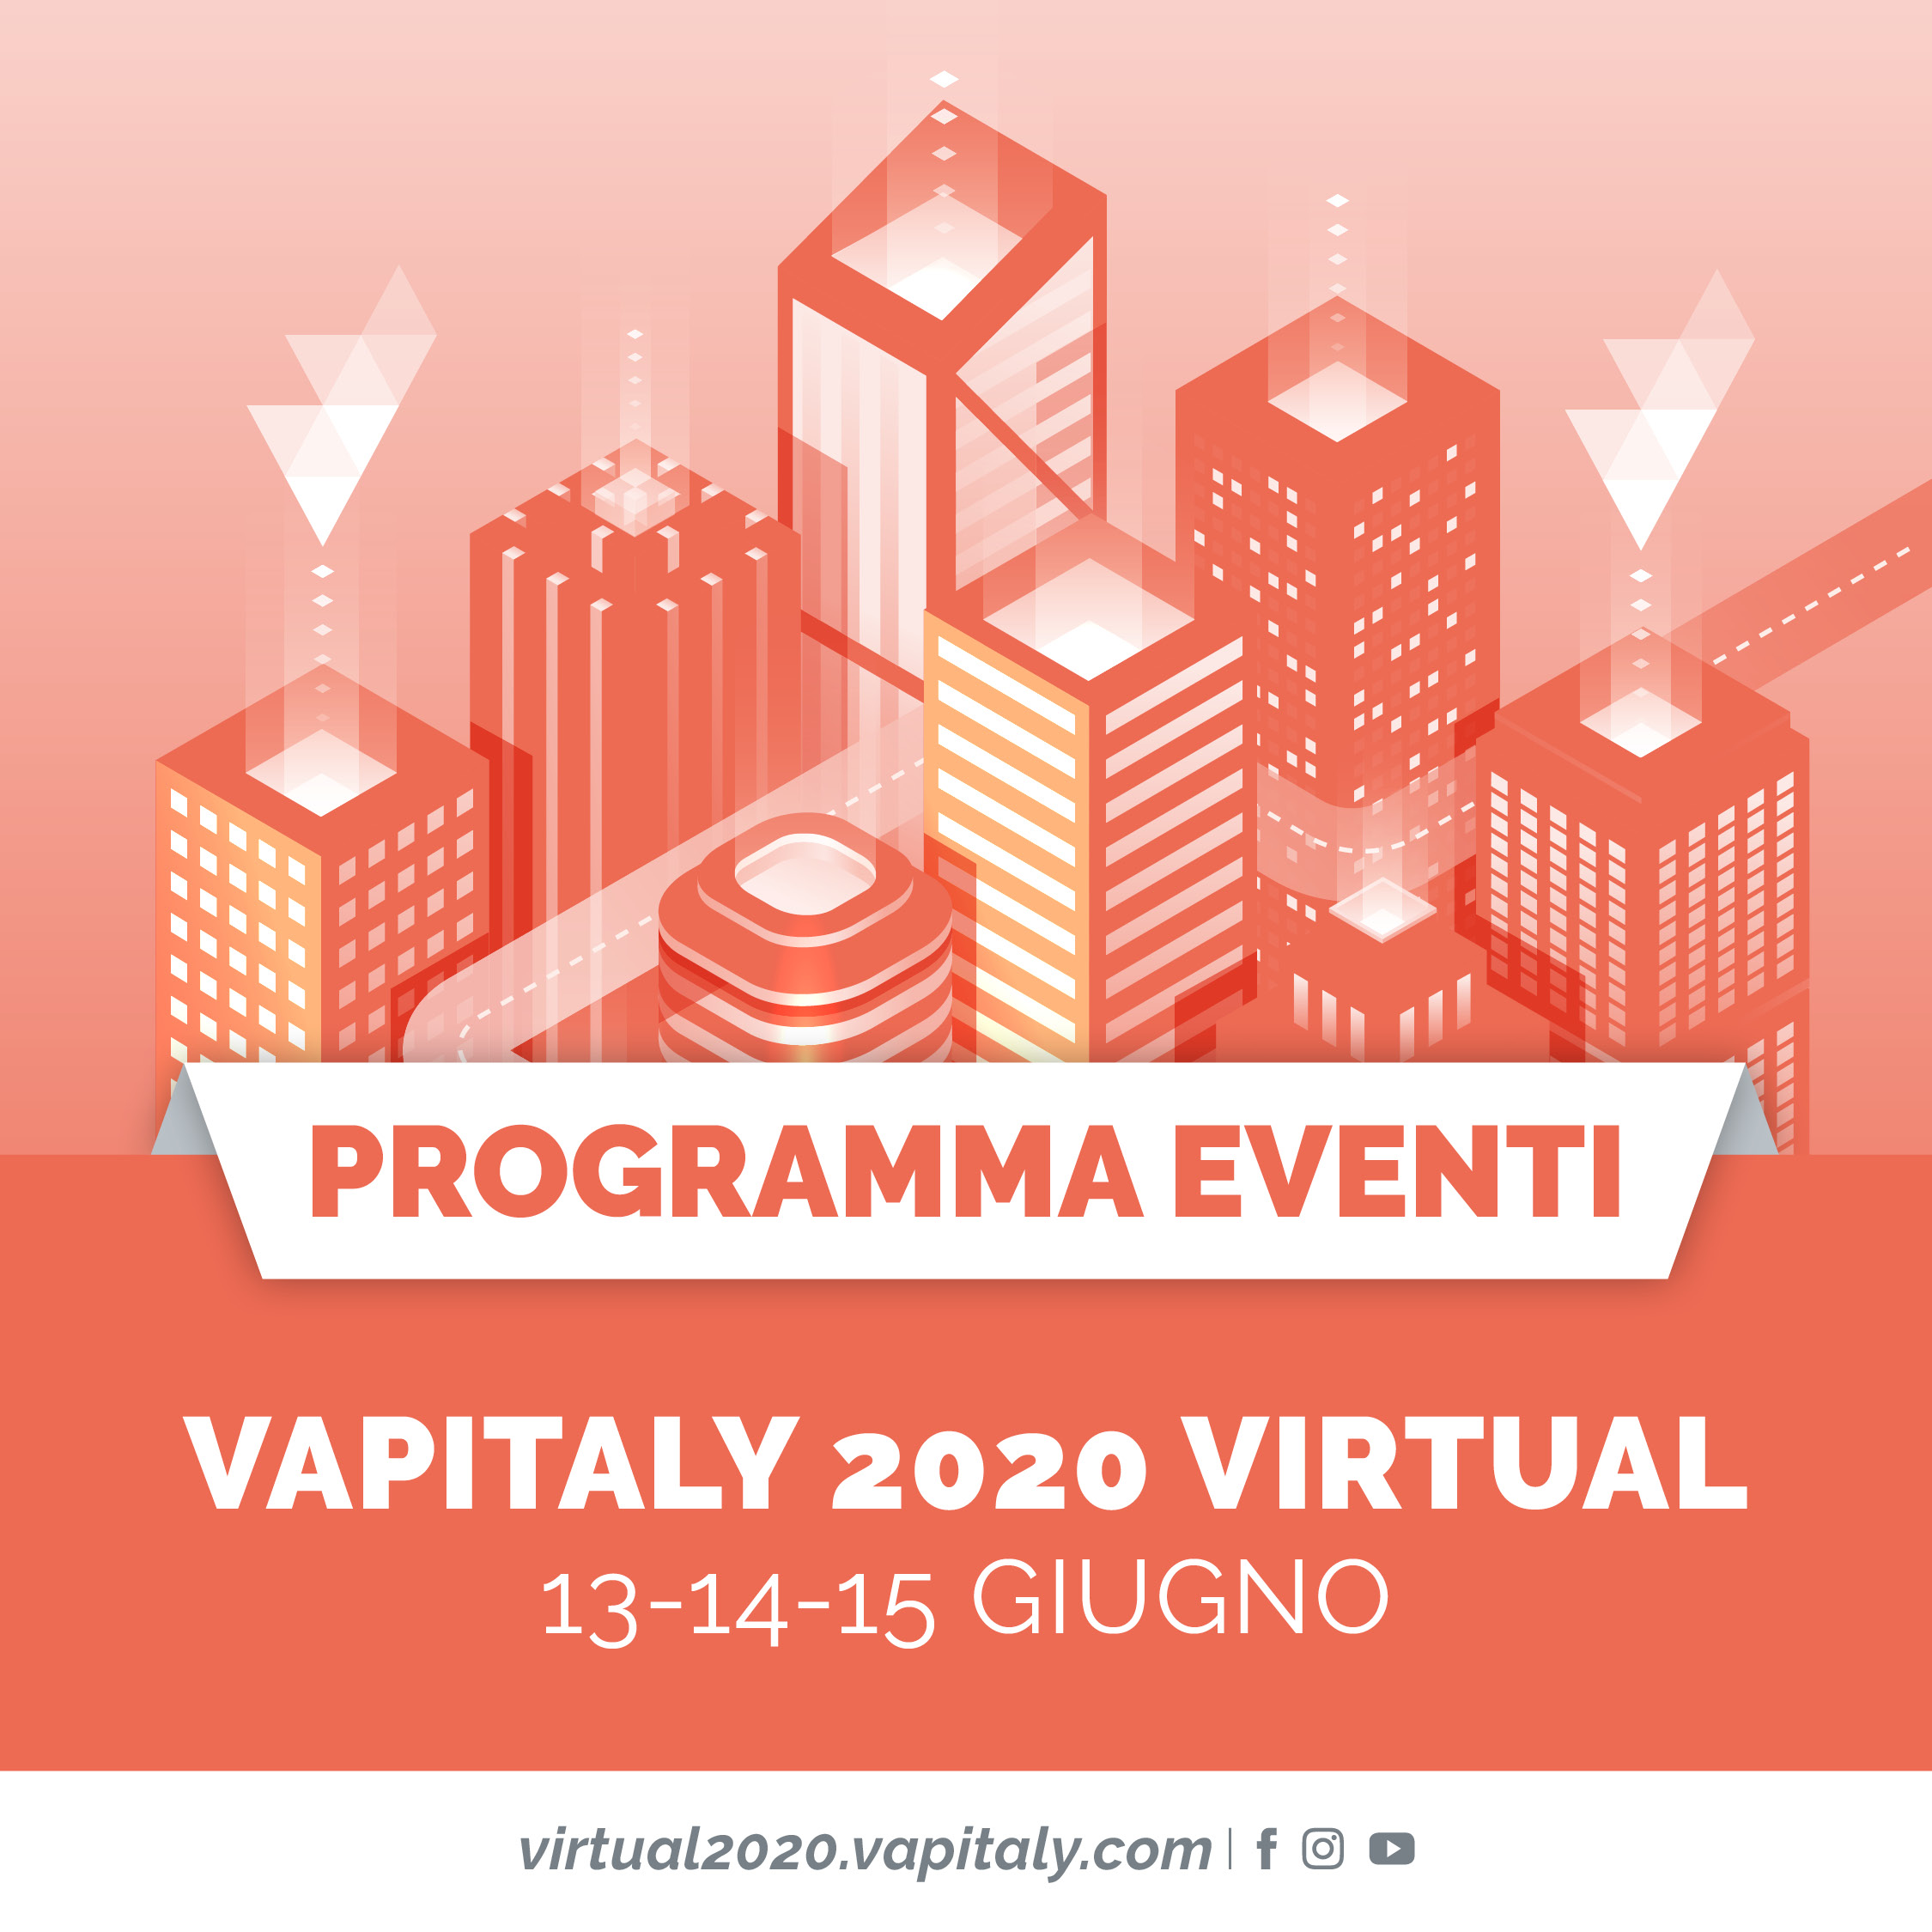 Vapitaly 2020 Virtual, the first virtual event in Europe dedicated to the Vaping sector, is about to begin!